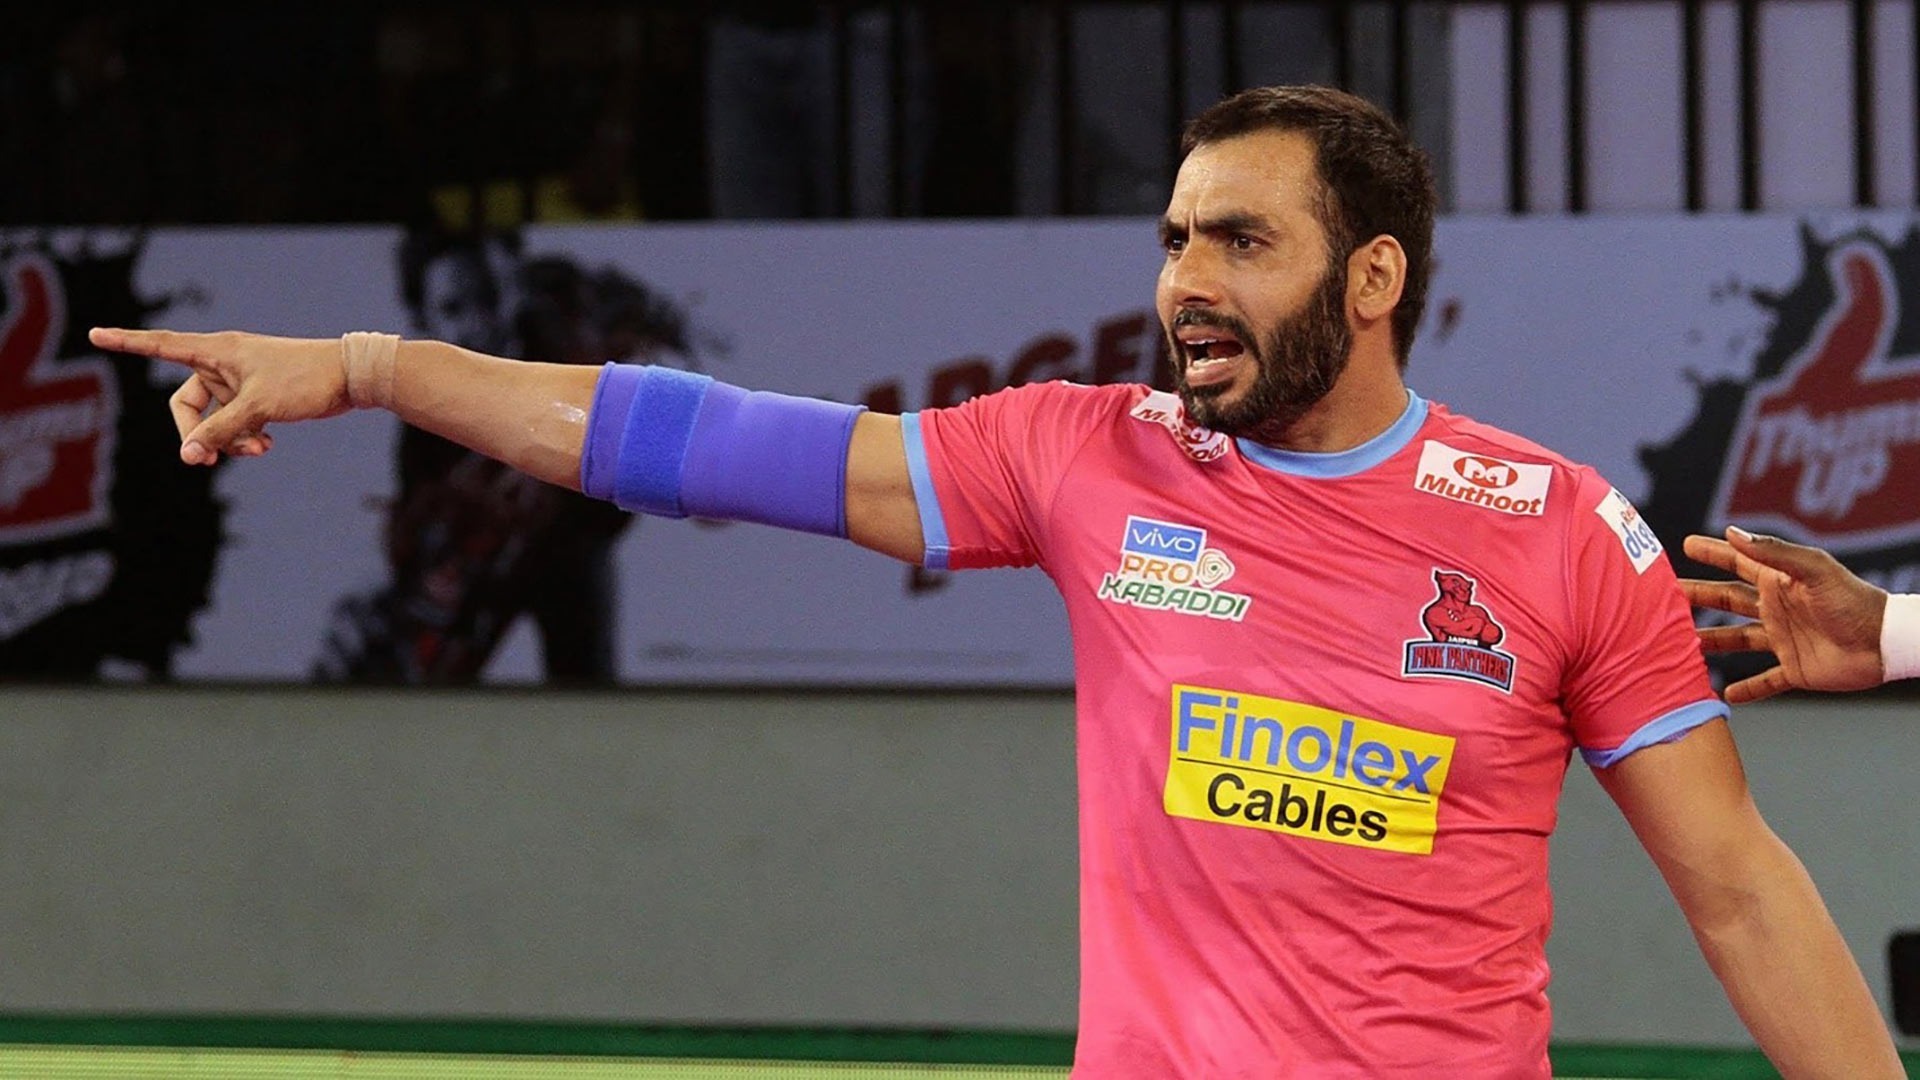 PKL 2019 | Retired from competitive kabaddi, Anup Kumar aims to build future stars through coaching